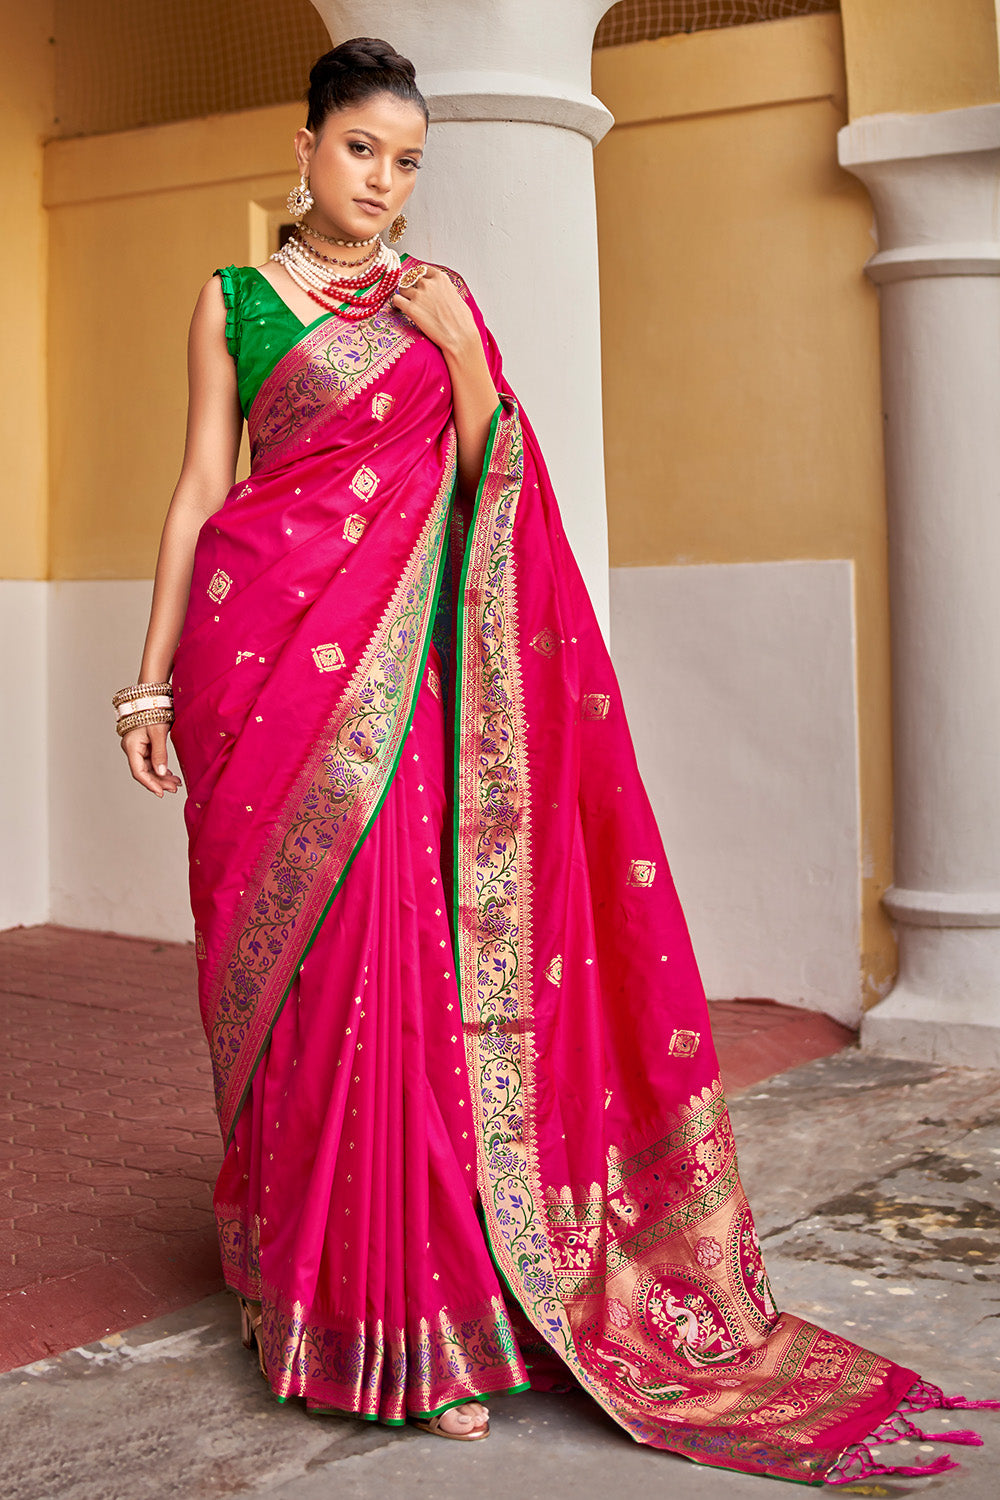 Latest Top Rated Farewell Party Sarees under Rs.599/- on Amazon